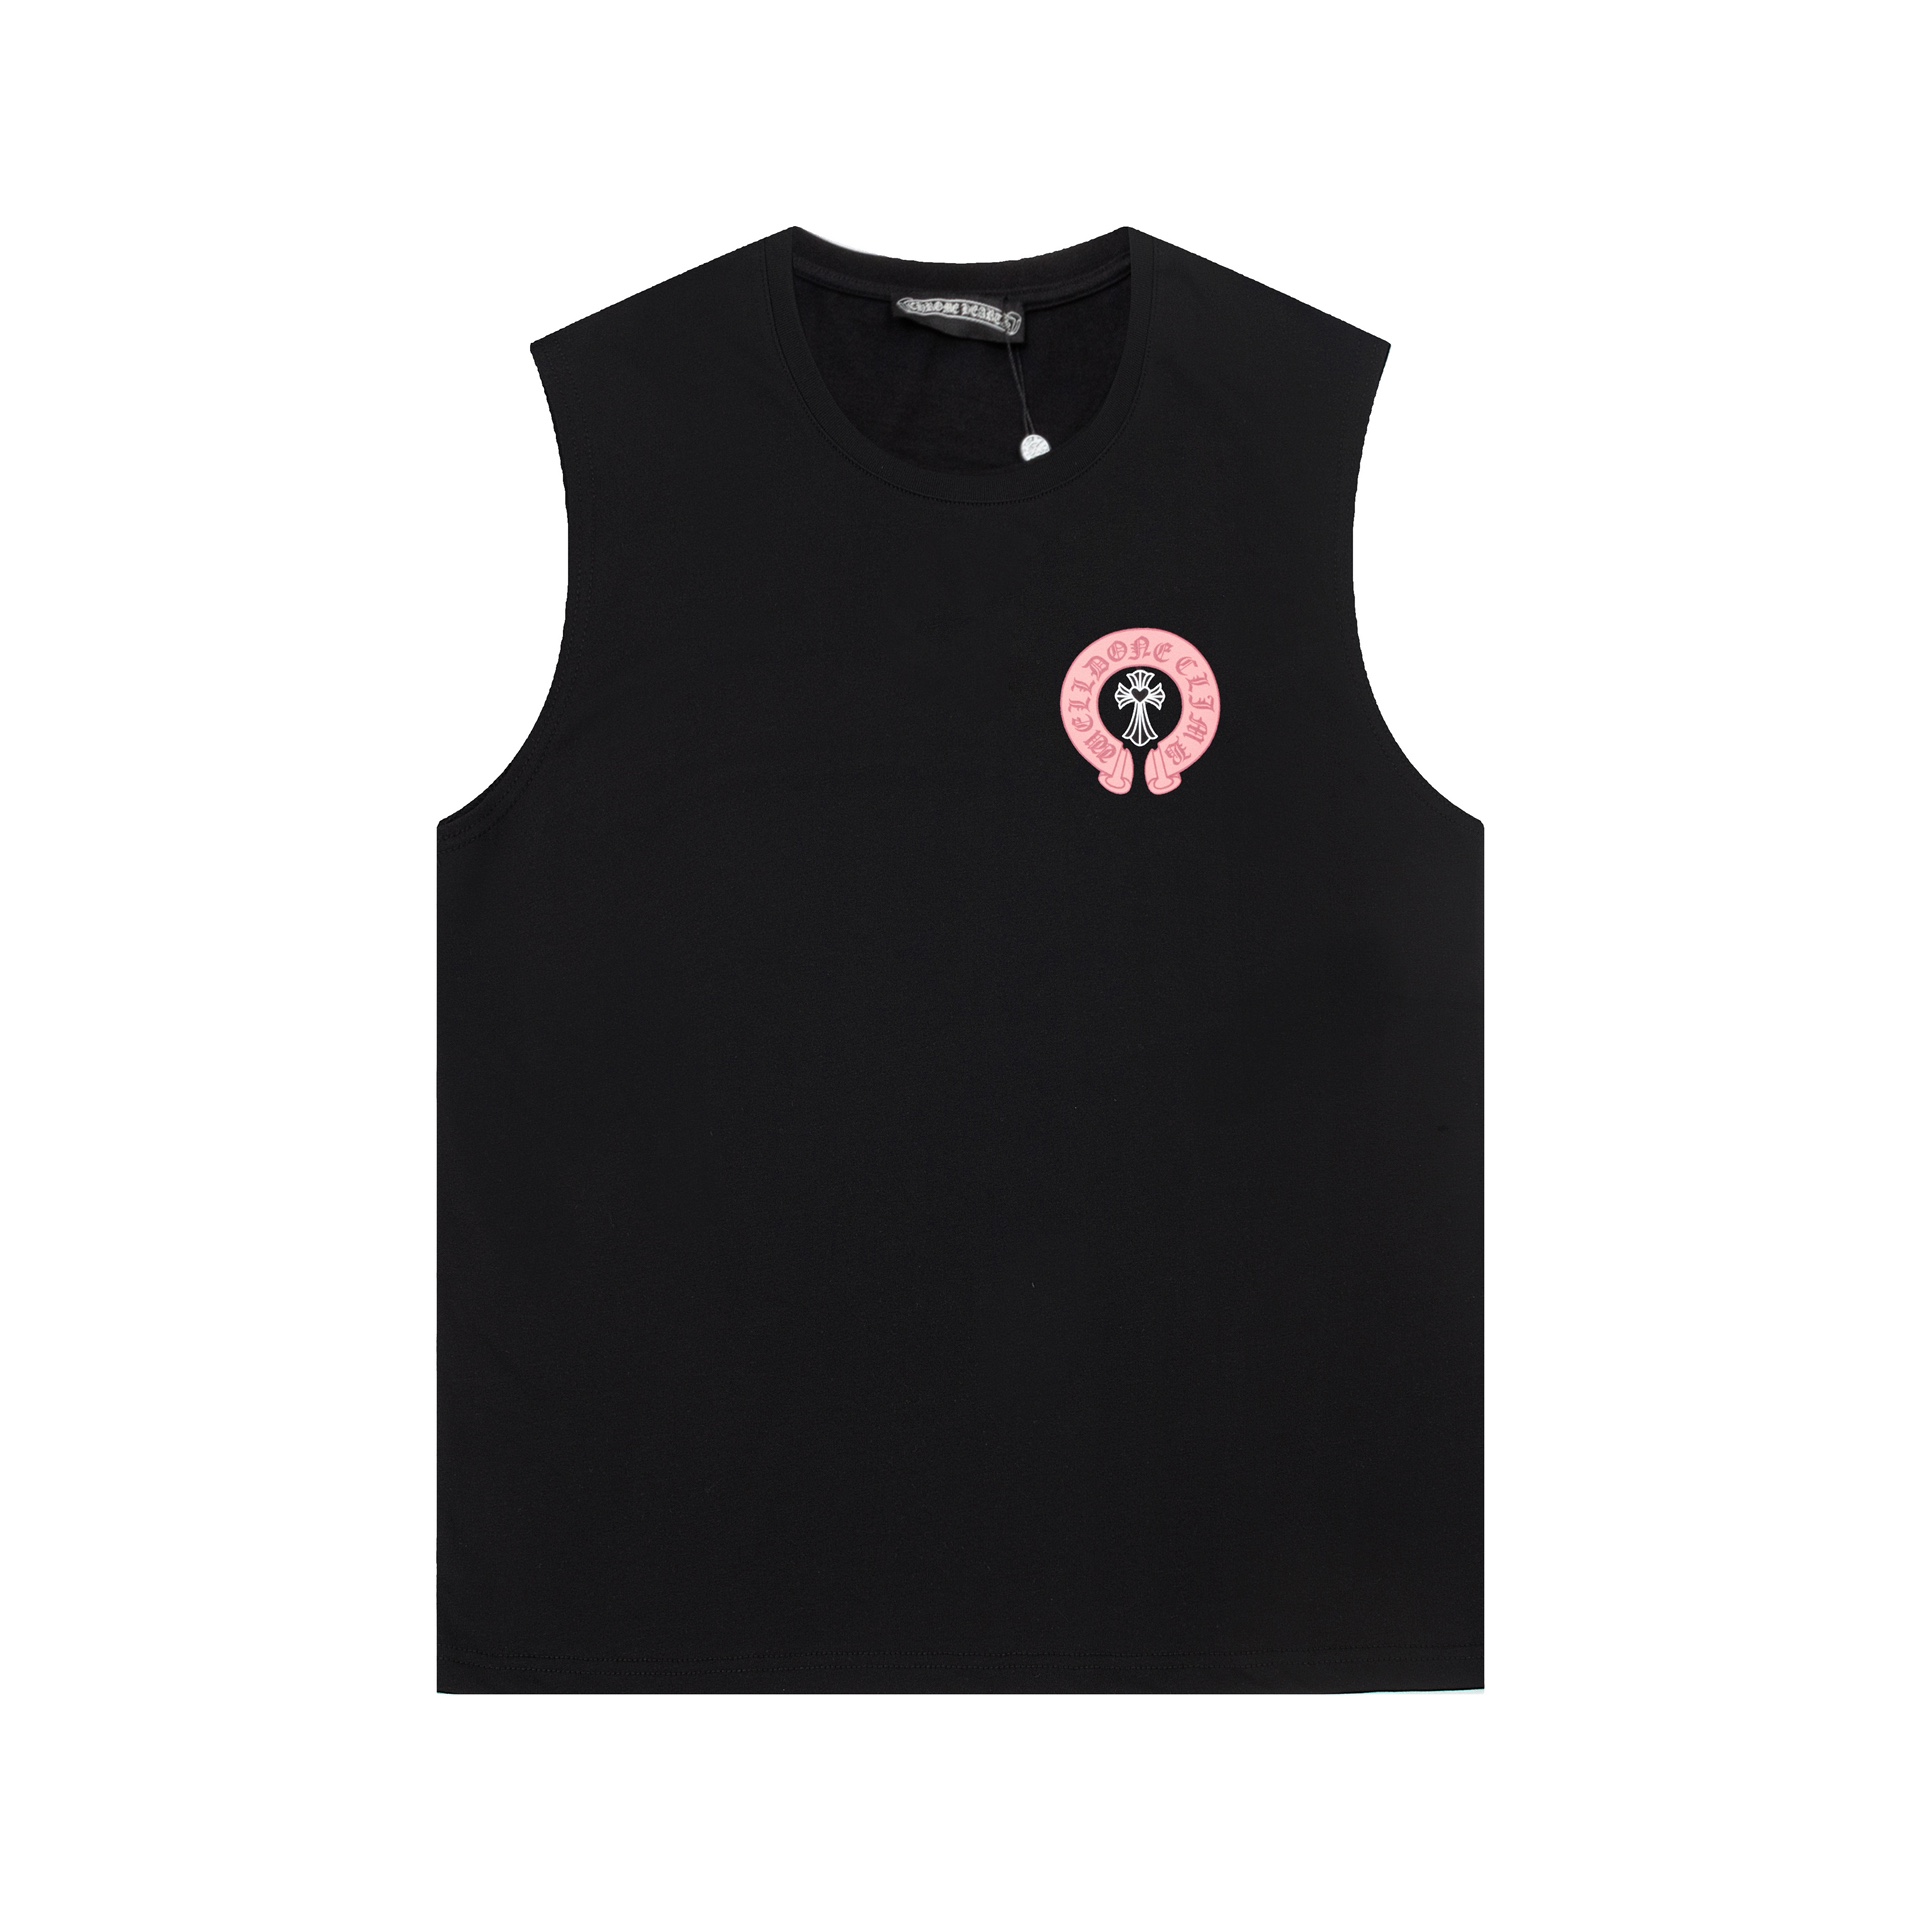 US Sale
 Chrome Hearts Clothing Tank Tops&Camis Waistcoats Black Pink Printing Unisex Spring/Summer Collection Fashion